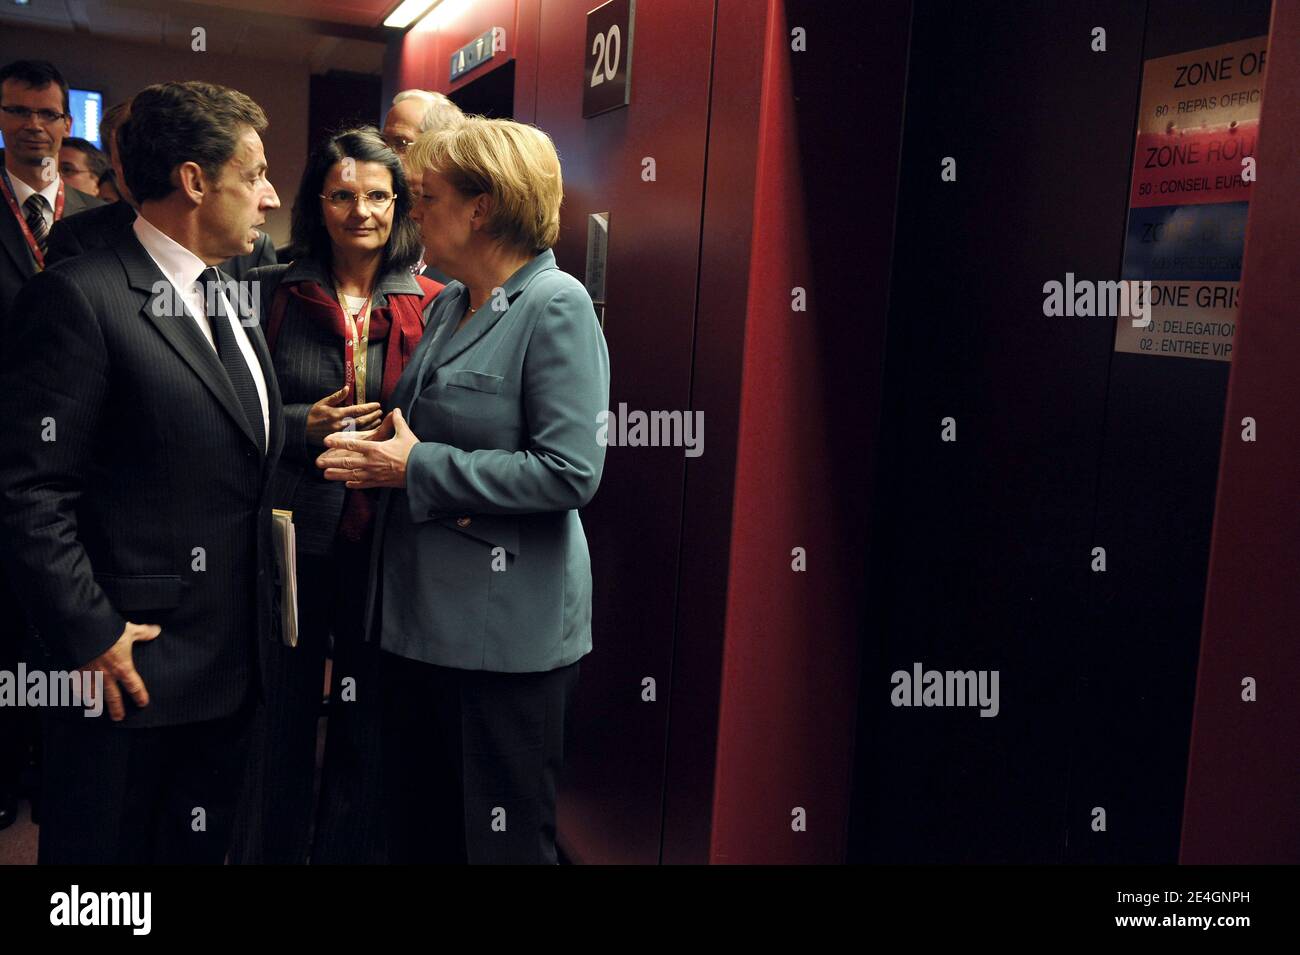 French President Nicolas Sarkozy and Germany's chancellor Angela Merkel pictured during the European Union Summit at the EU headquarters in Brussels, Belgium, on November 19, 2009. Photo by Elodie Gregoire/ABACAPRESS.COM Stock Photo